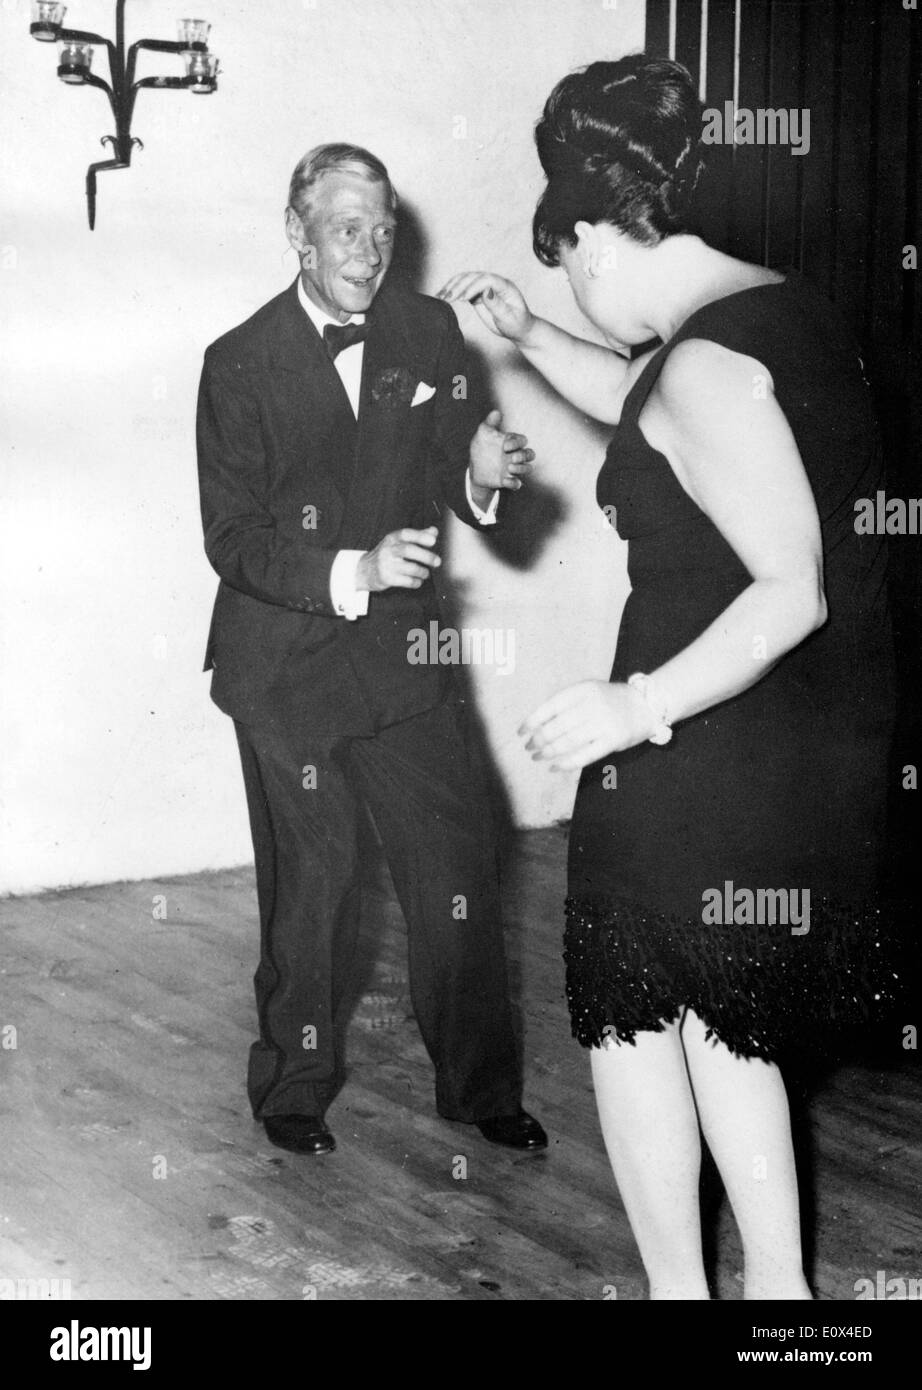 The Duke dances with a 'Square Dance' dancer Stock Photo